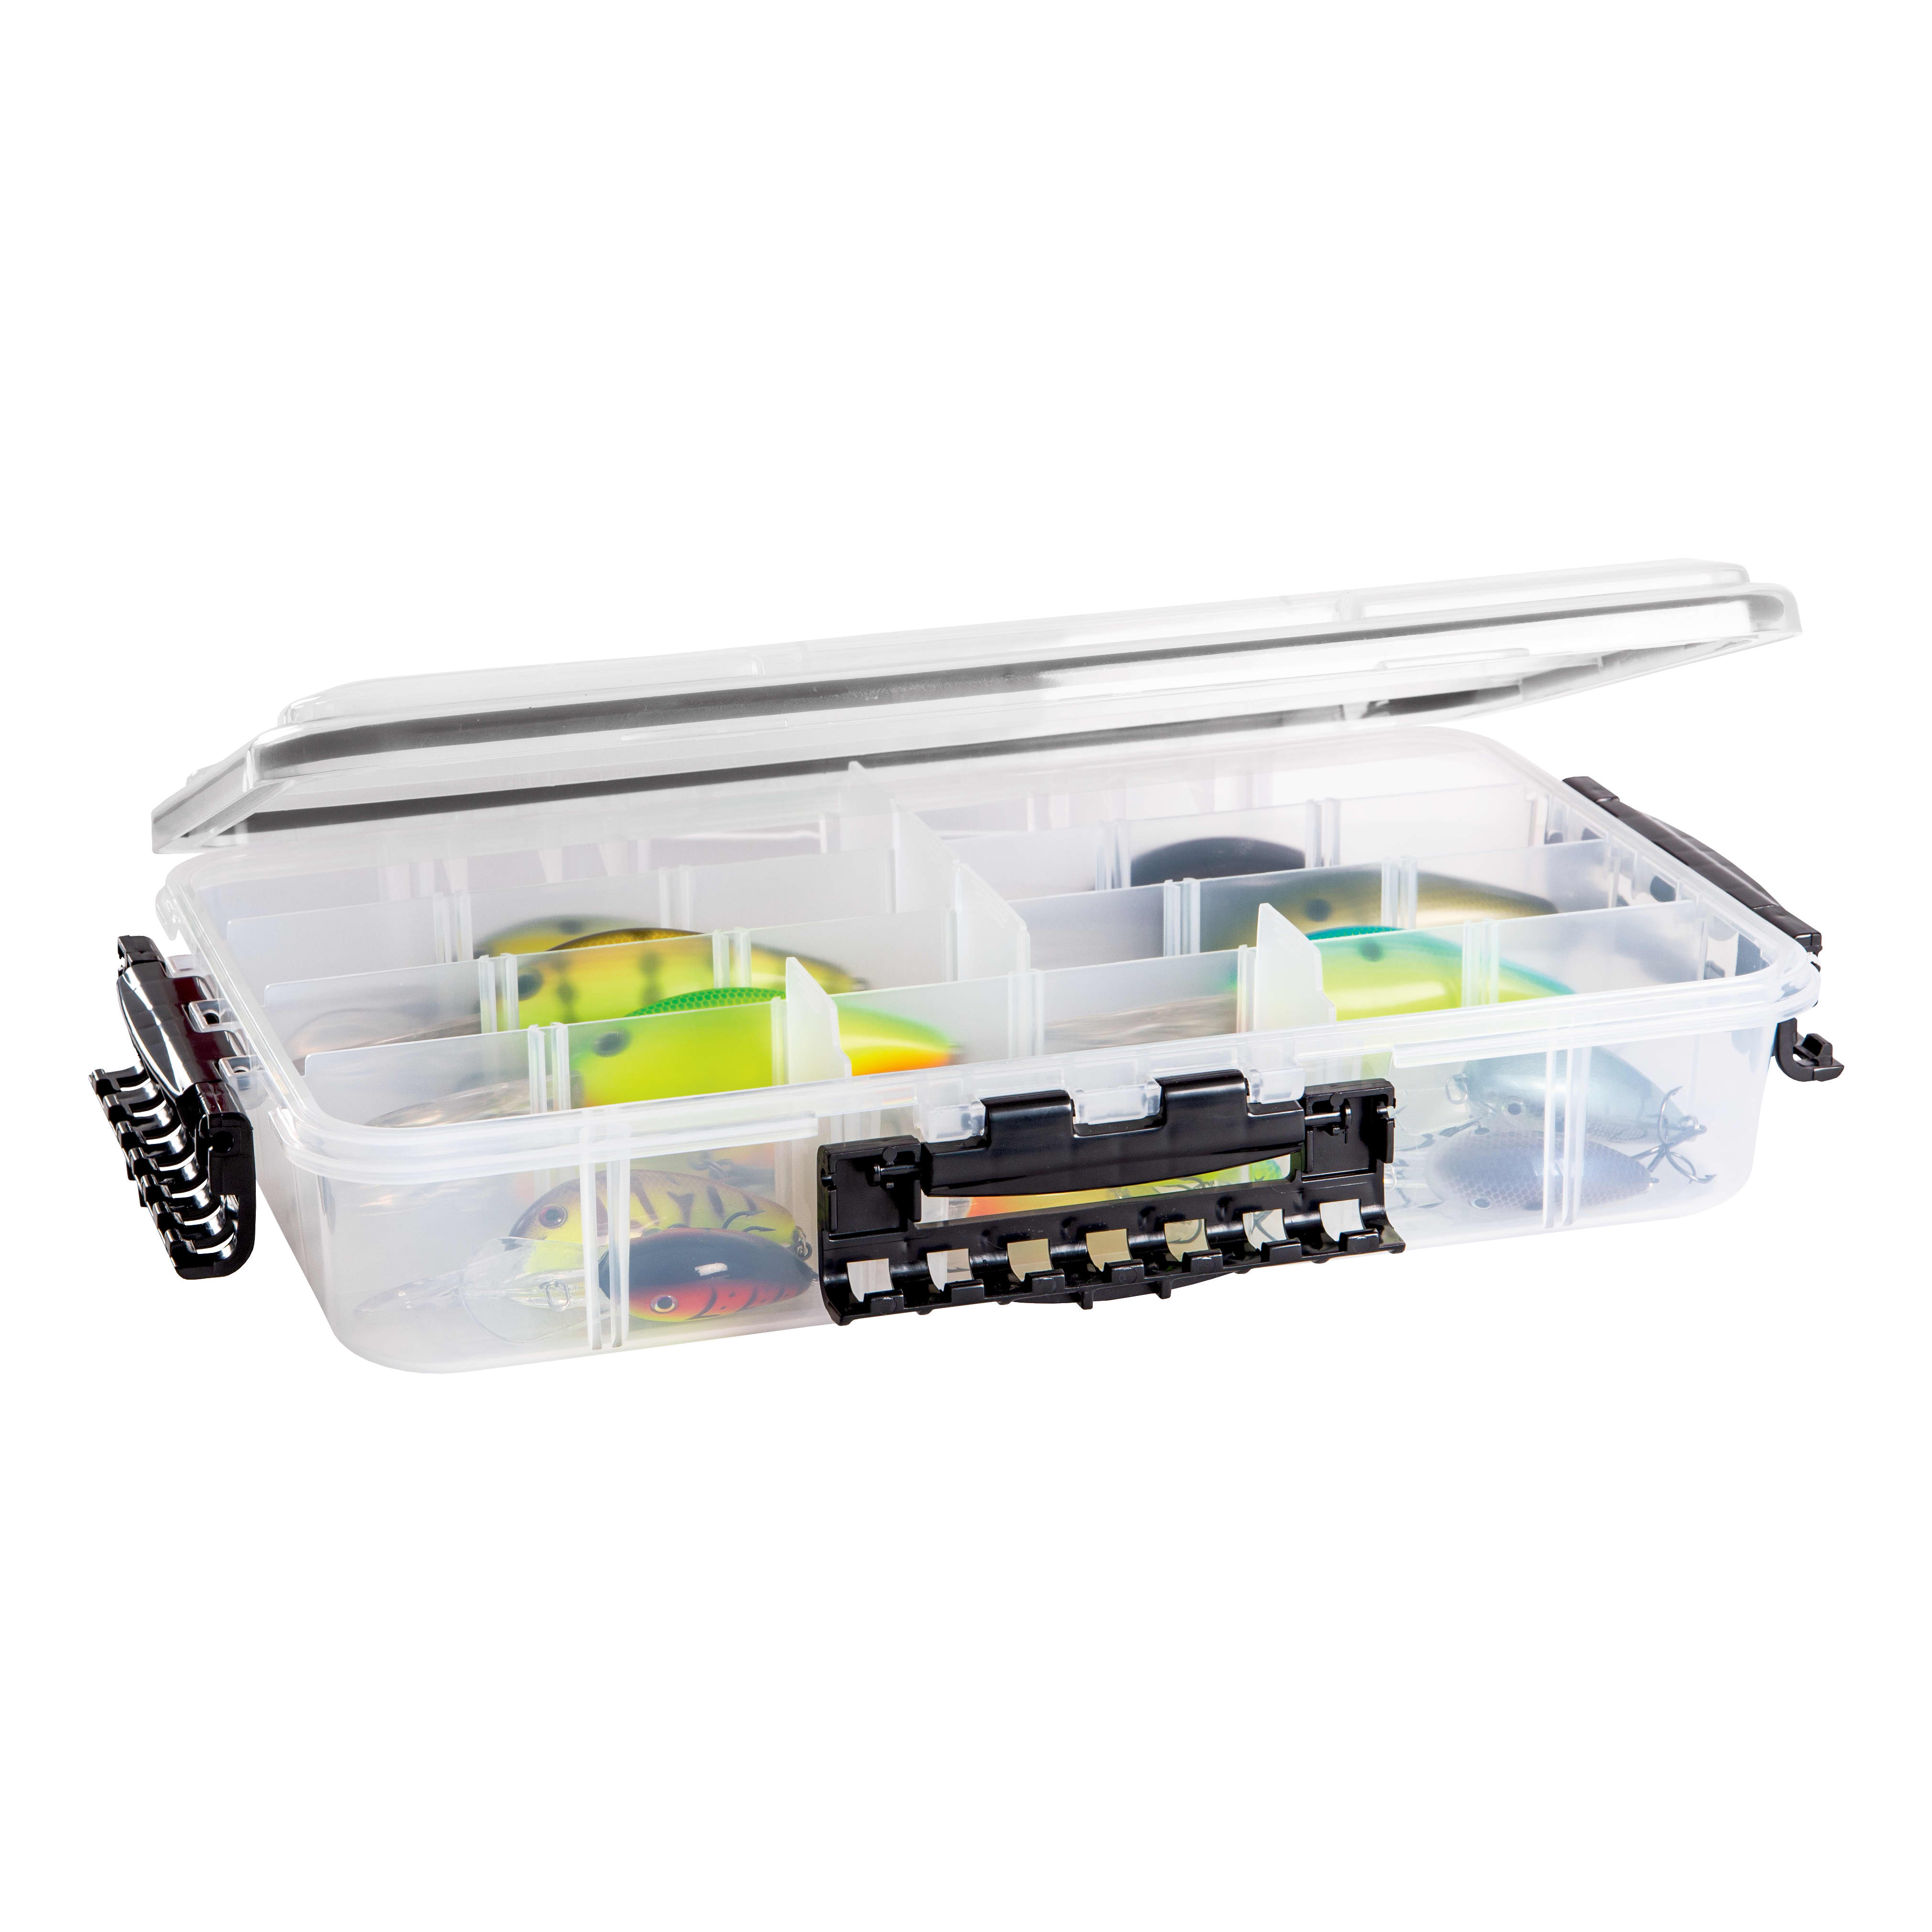 PLANO 4-By™ 3600 Stowaway Rack System Tackle Box